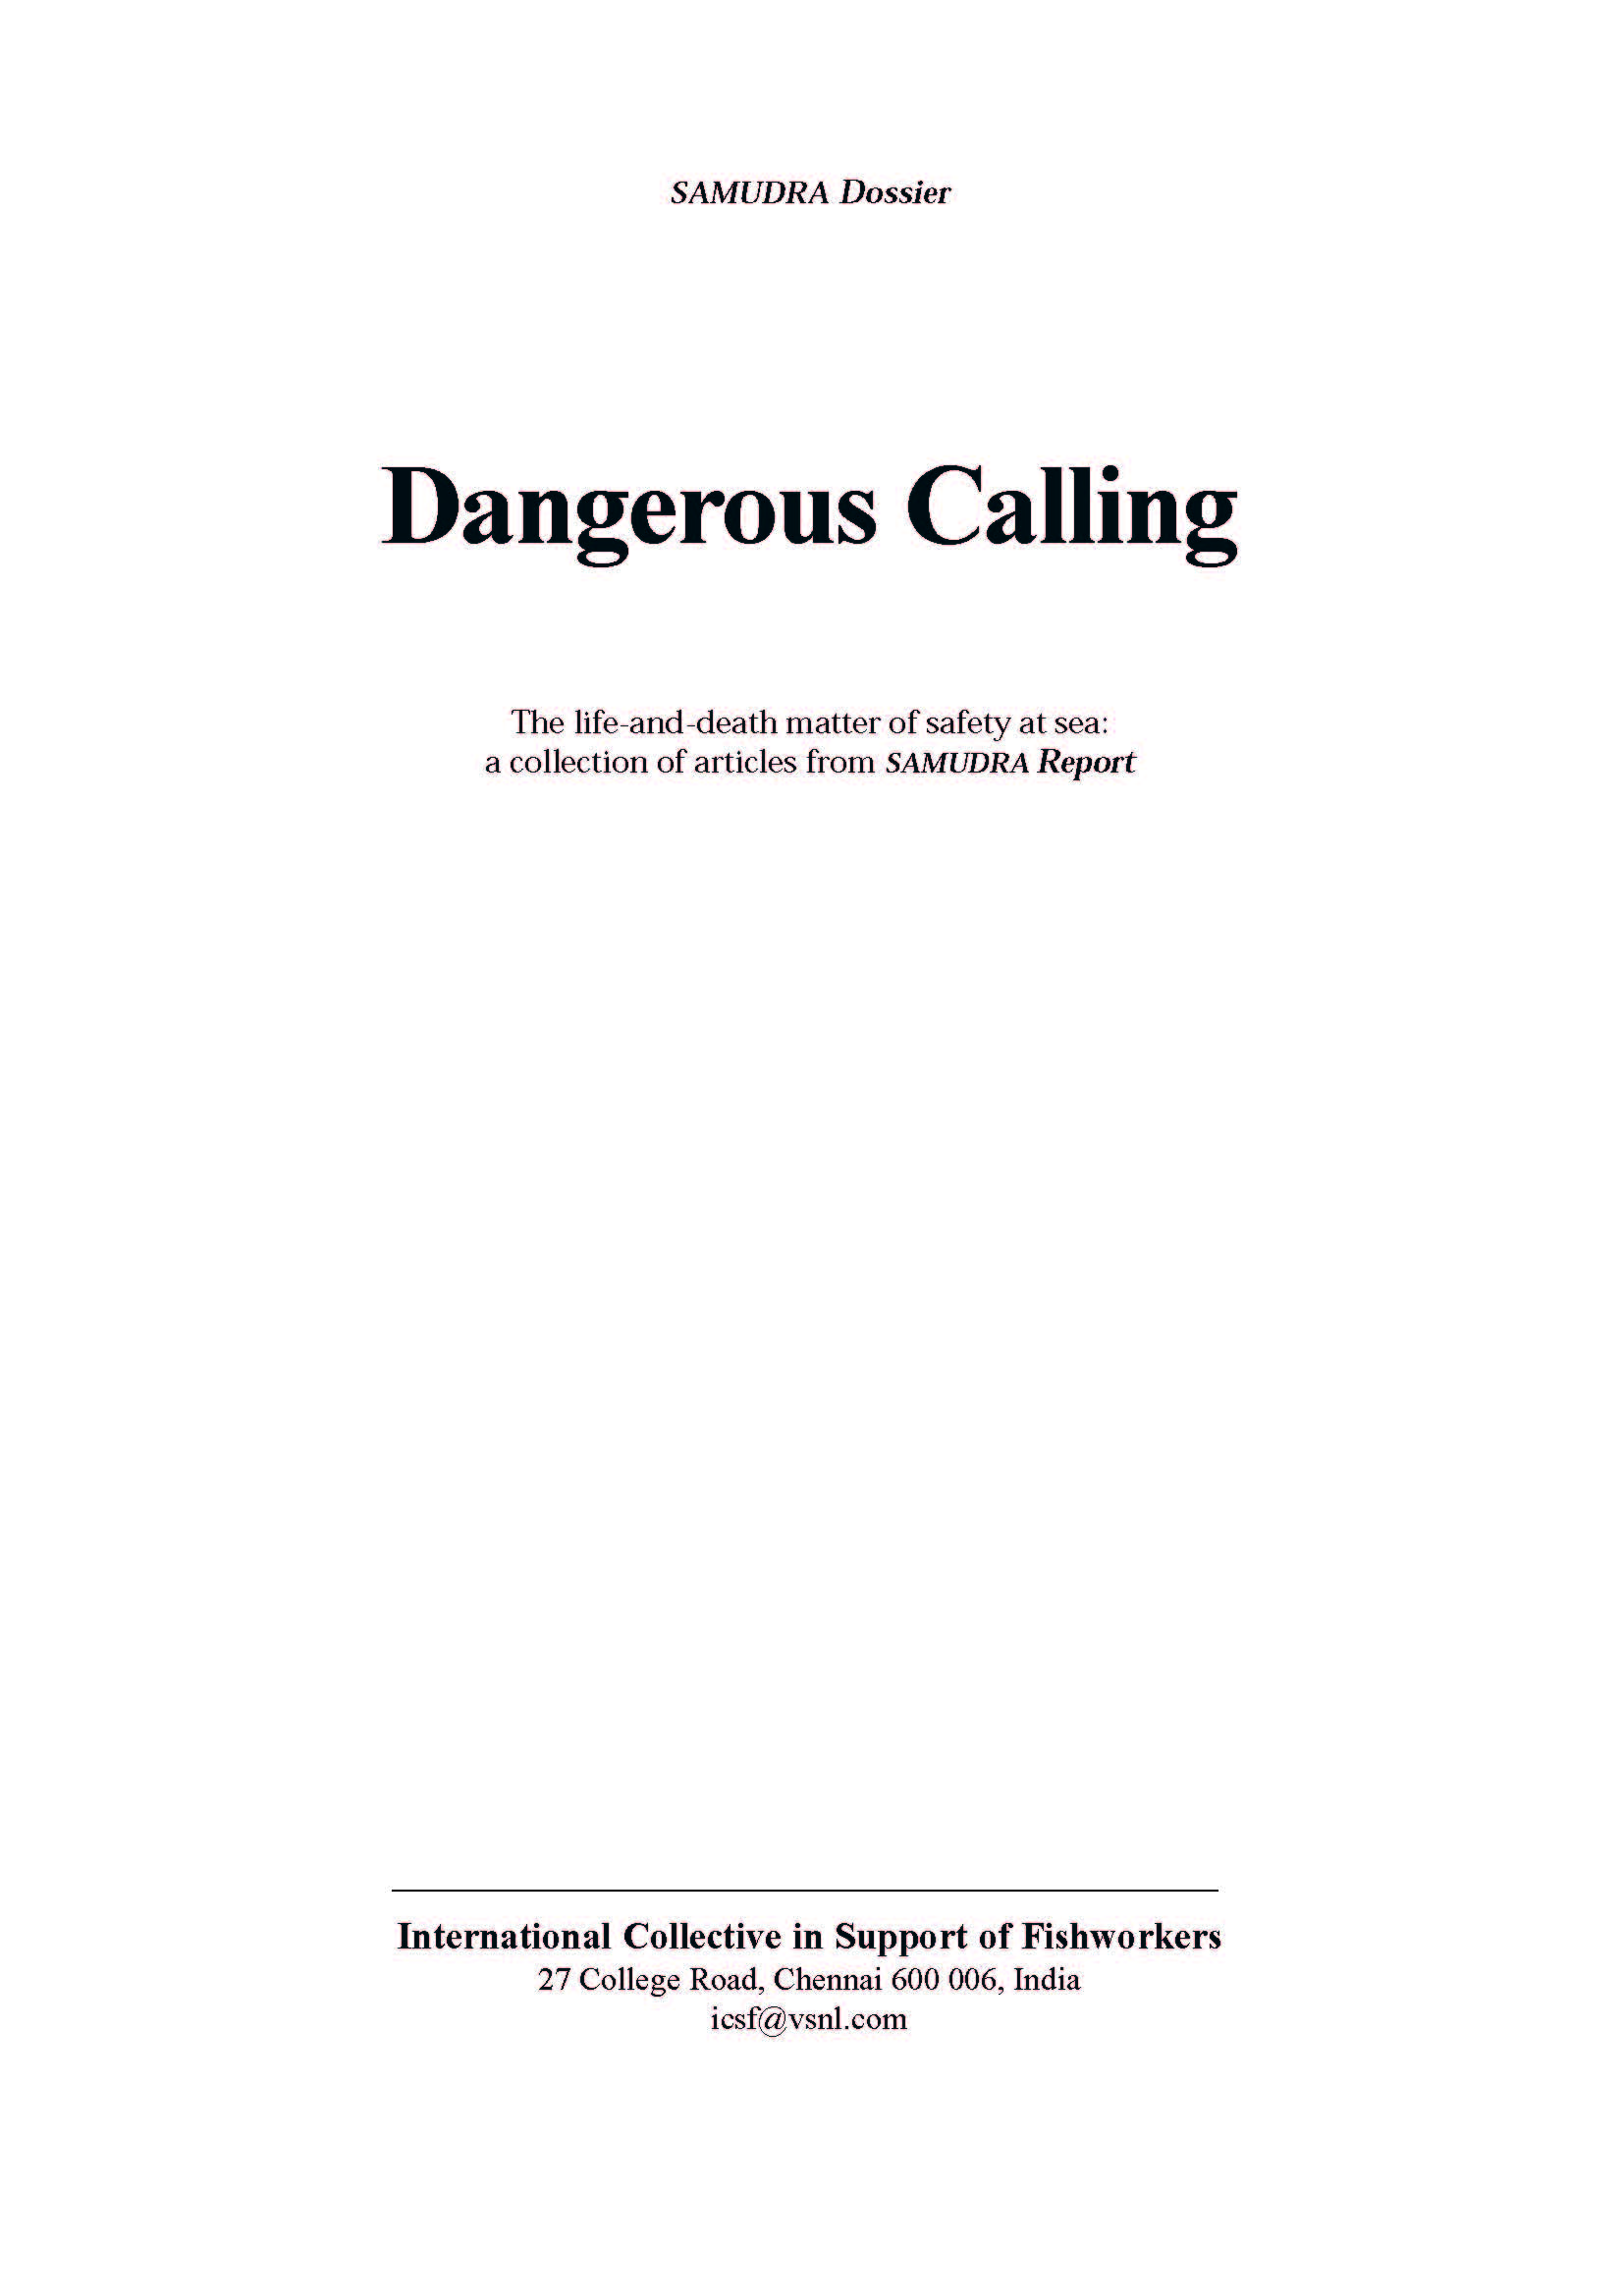 Dangerous Calling: The Life-and-Death Matter of Safety at Sea: A Collection of Articles from Samudra Report